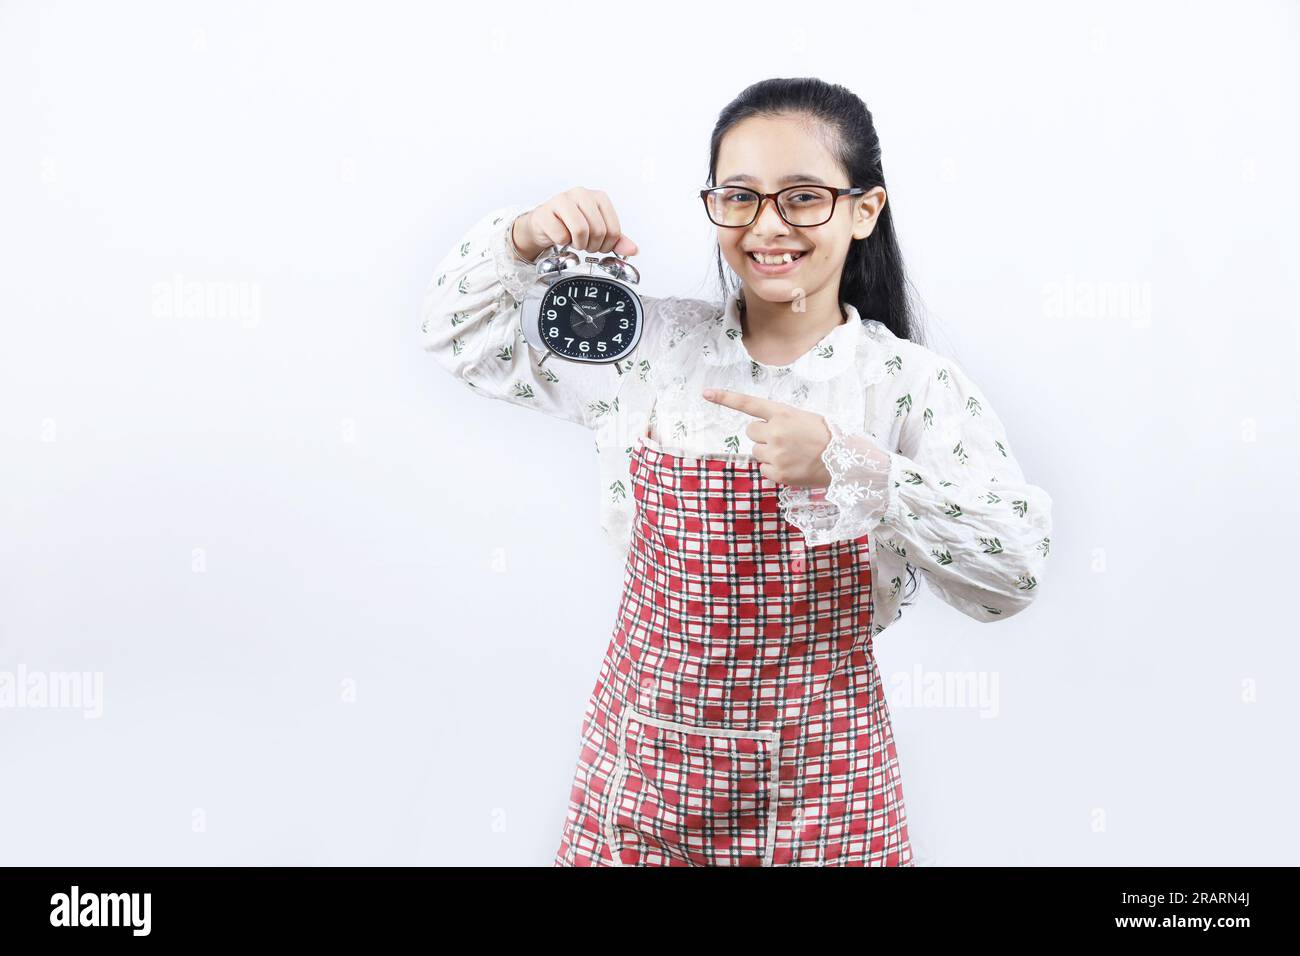 Young teenage girl holding an alarm clock in hand and pointing towards the alarm clock. Stock Photo